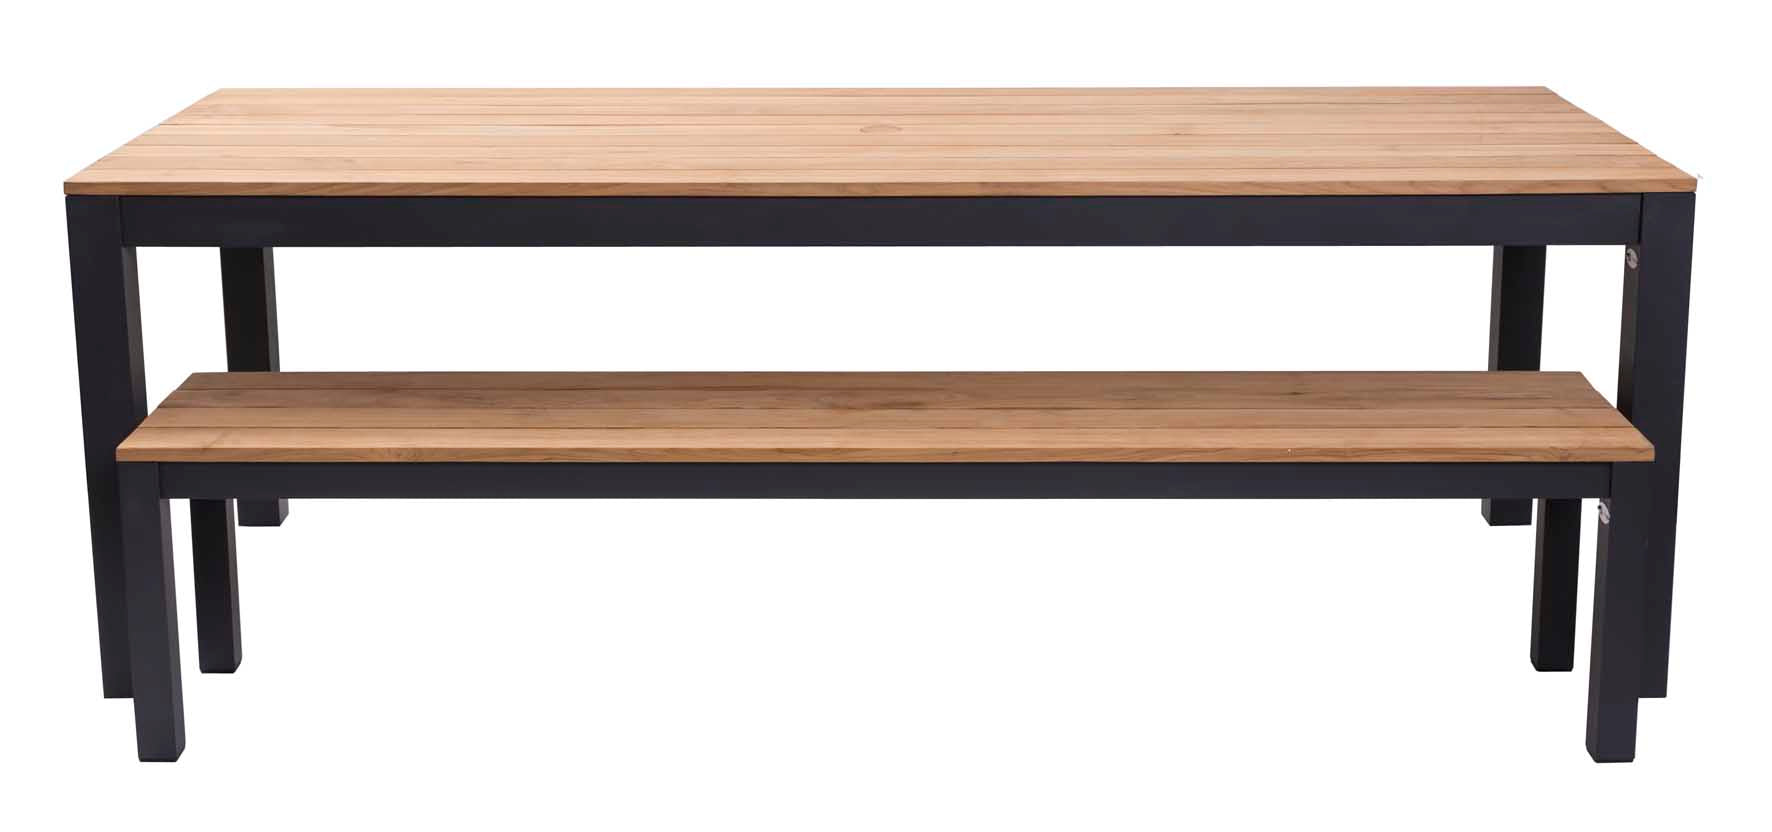 MORE THE MERRIER BENCH - ANTHRACITE